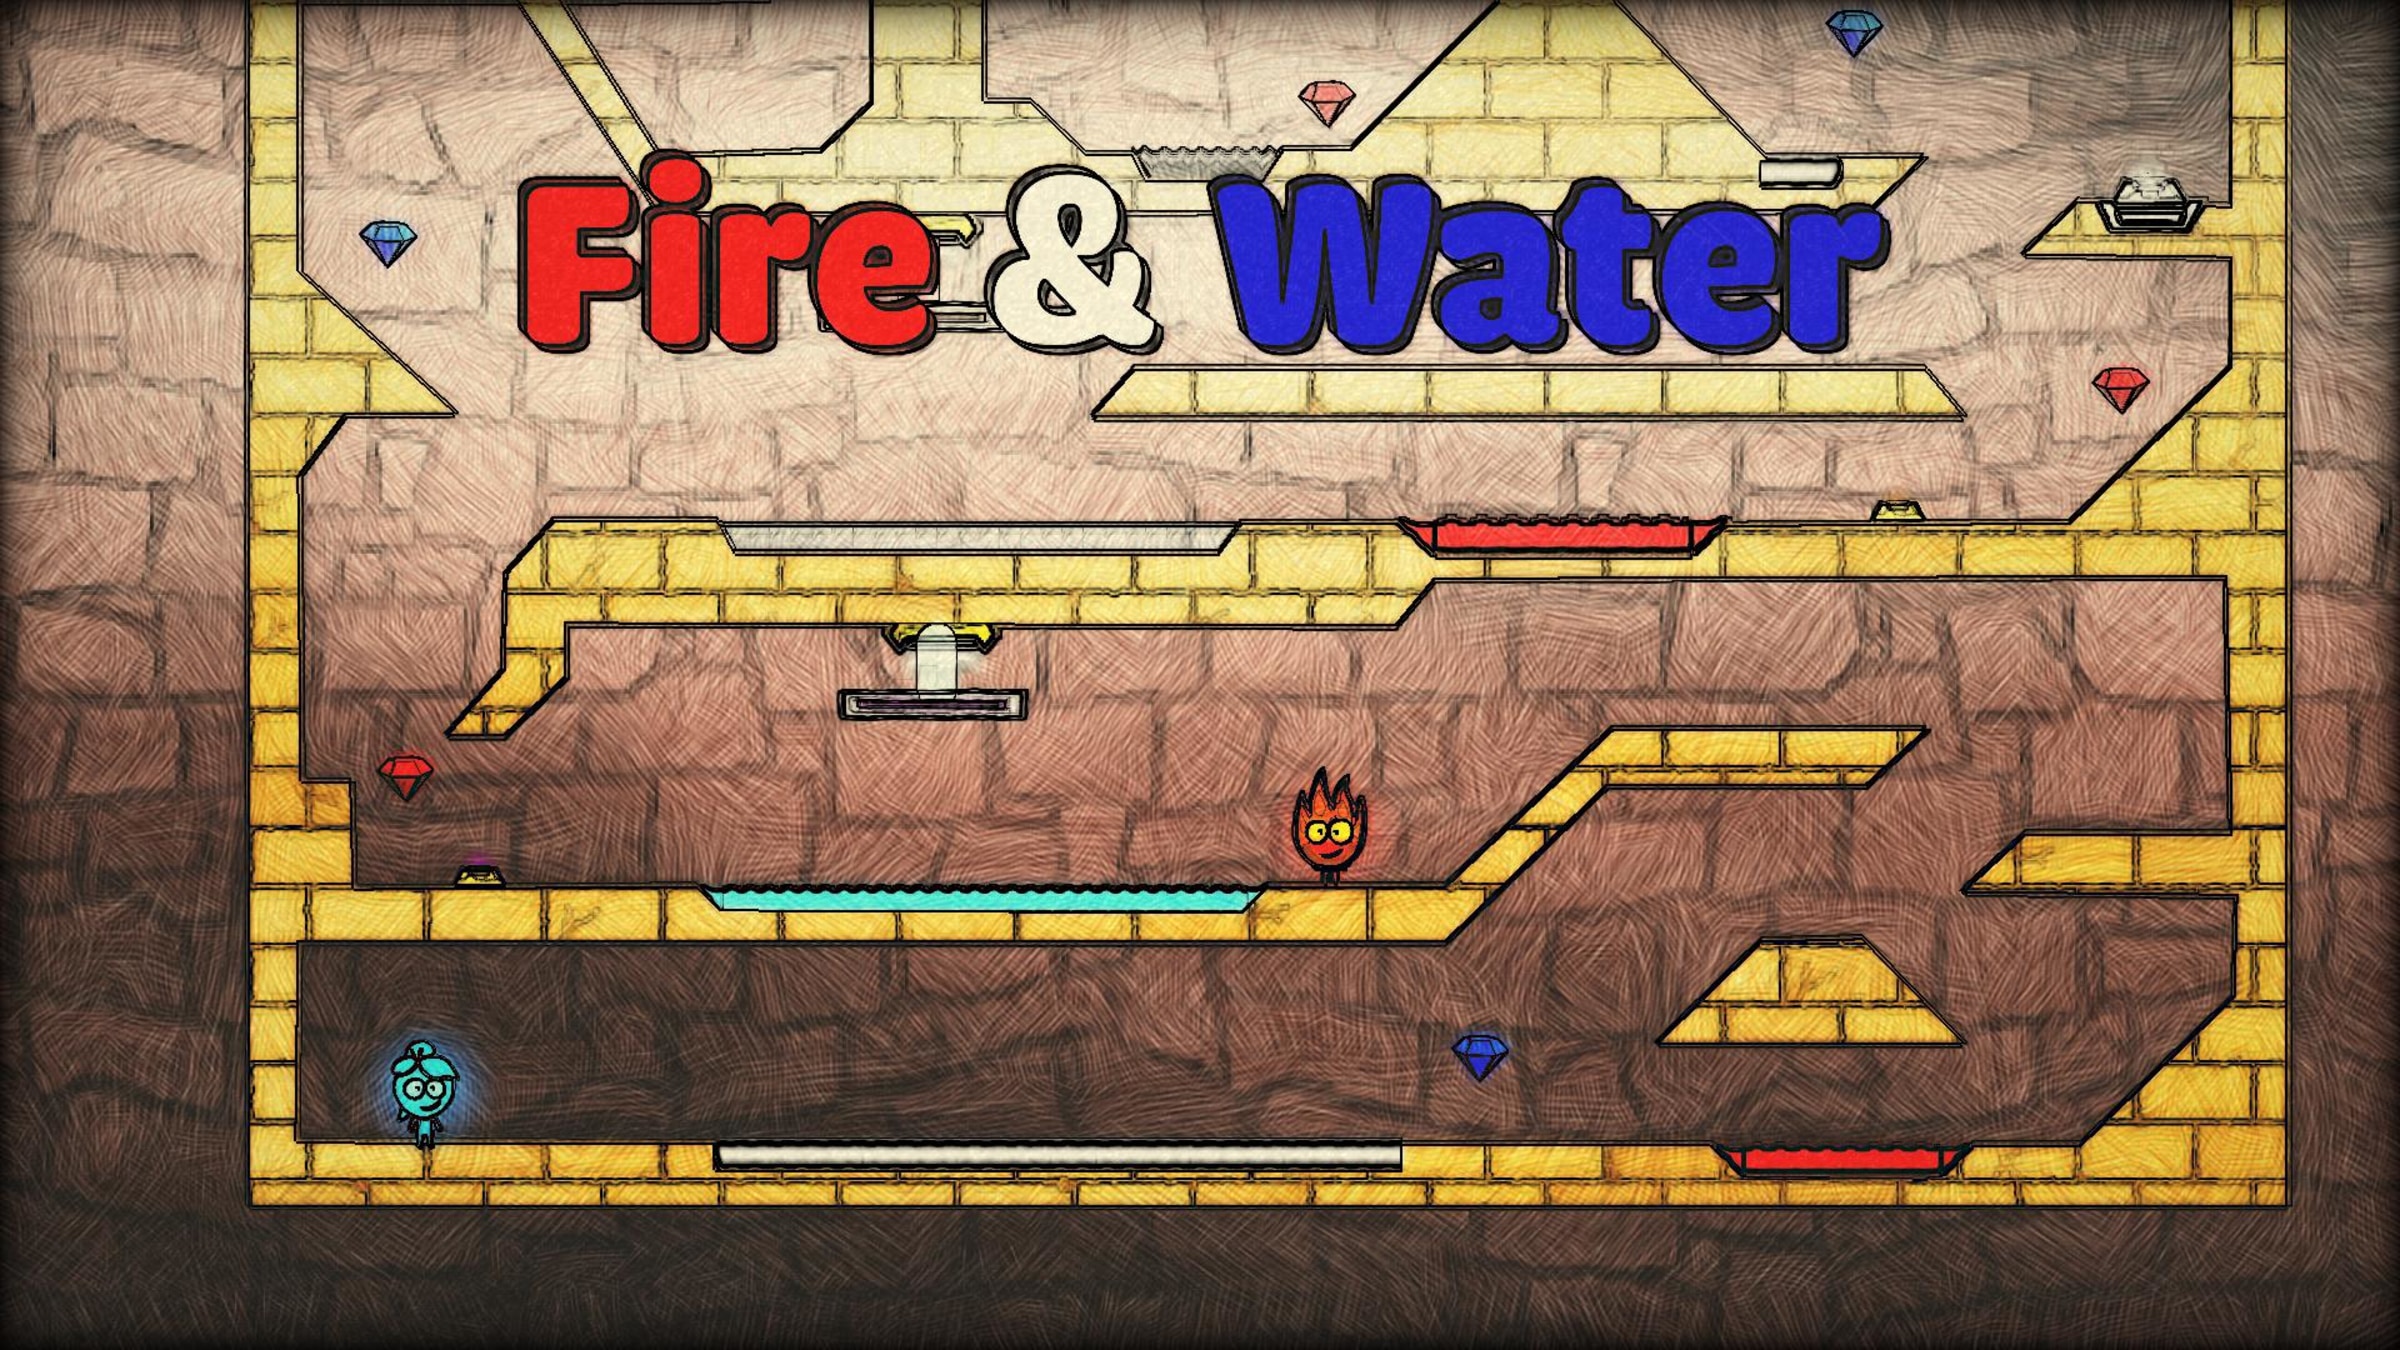 Fireboy And Watergirl 5: Elements The Light Temple Level 1 To 9 Full  Gameplay 